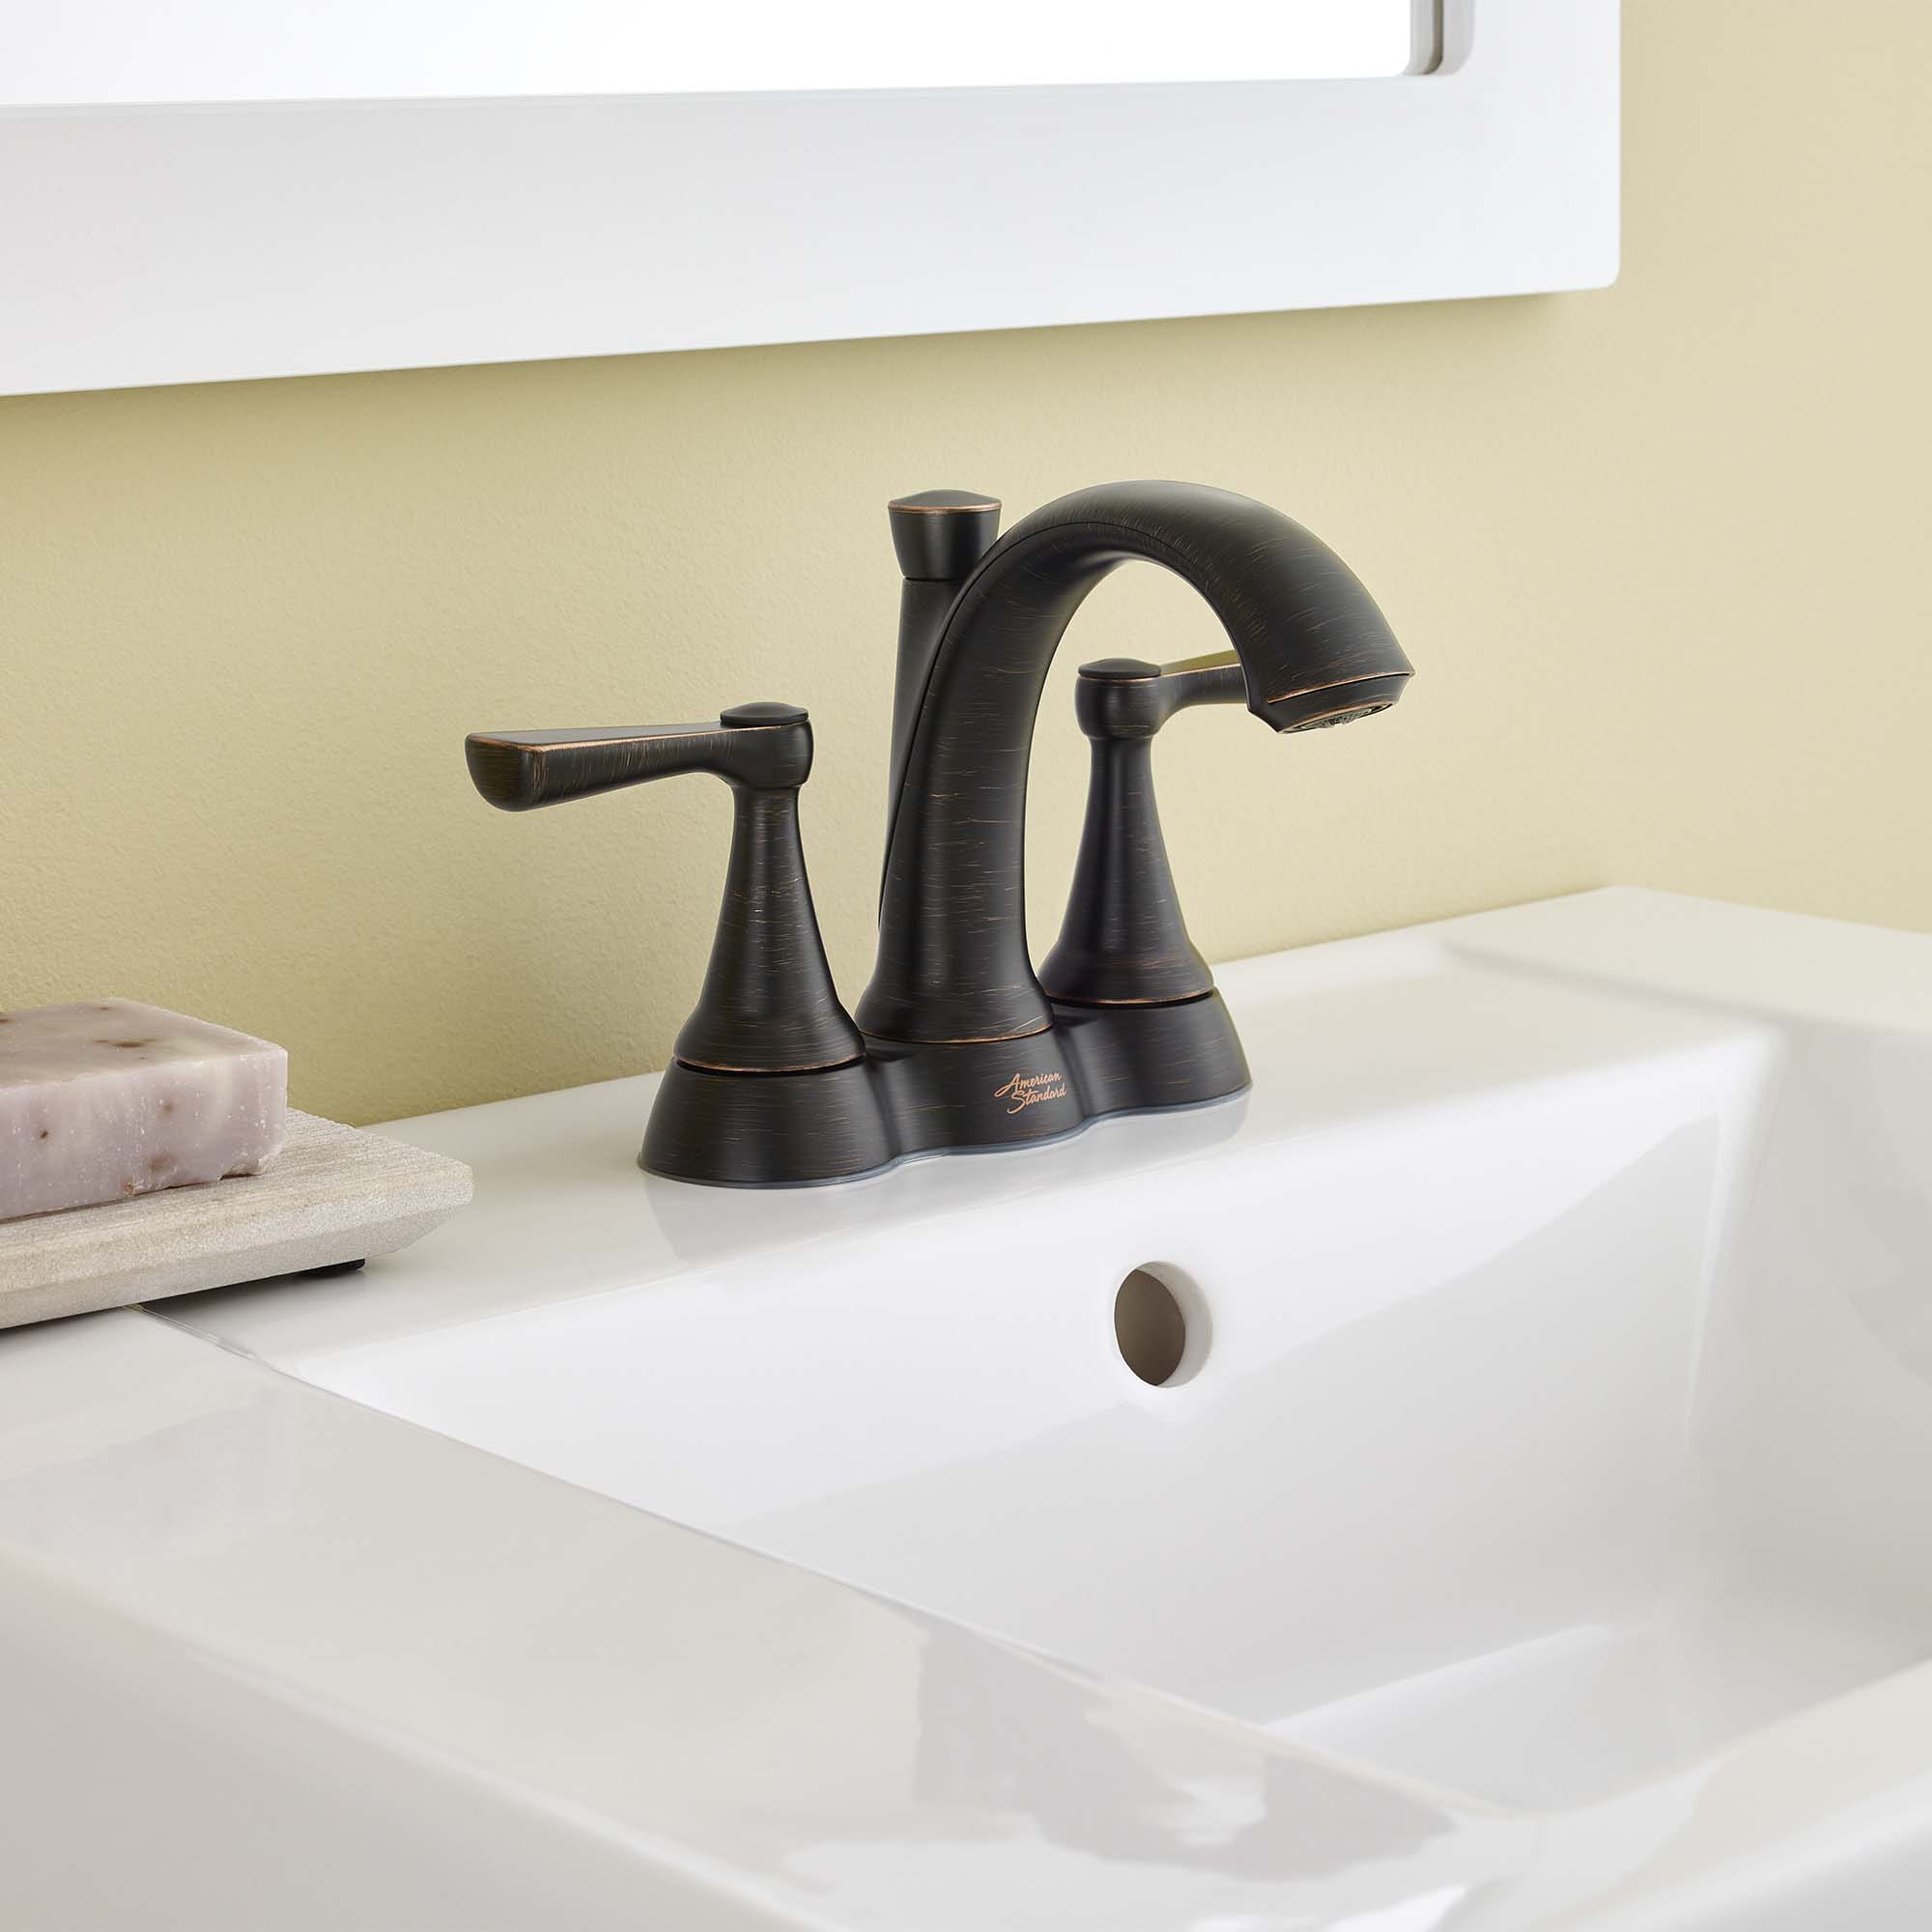 Kempton 4 In Centerset 2 Handle Bathroom Faucet 12 GPM with Lever Handles LEGACY BRONZE